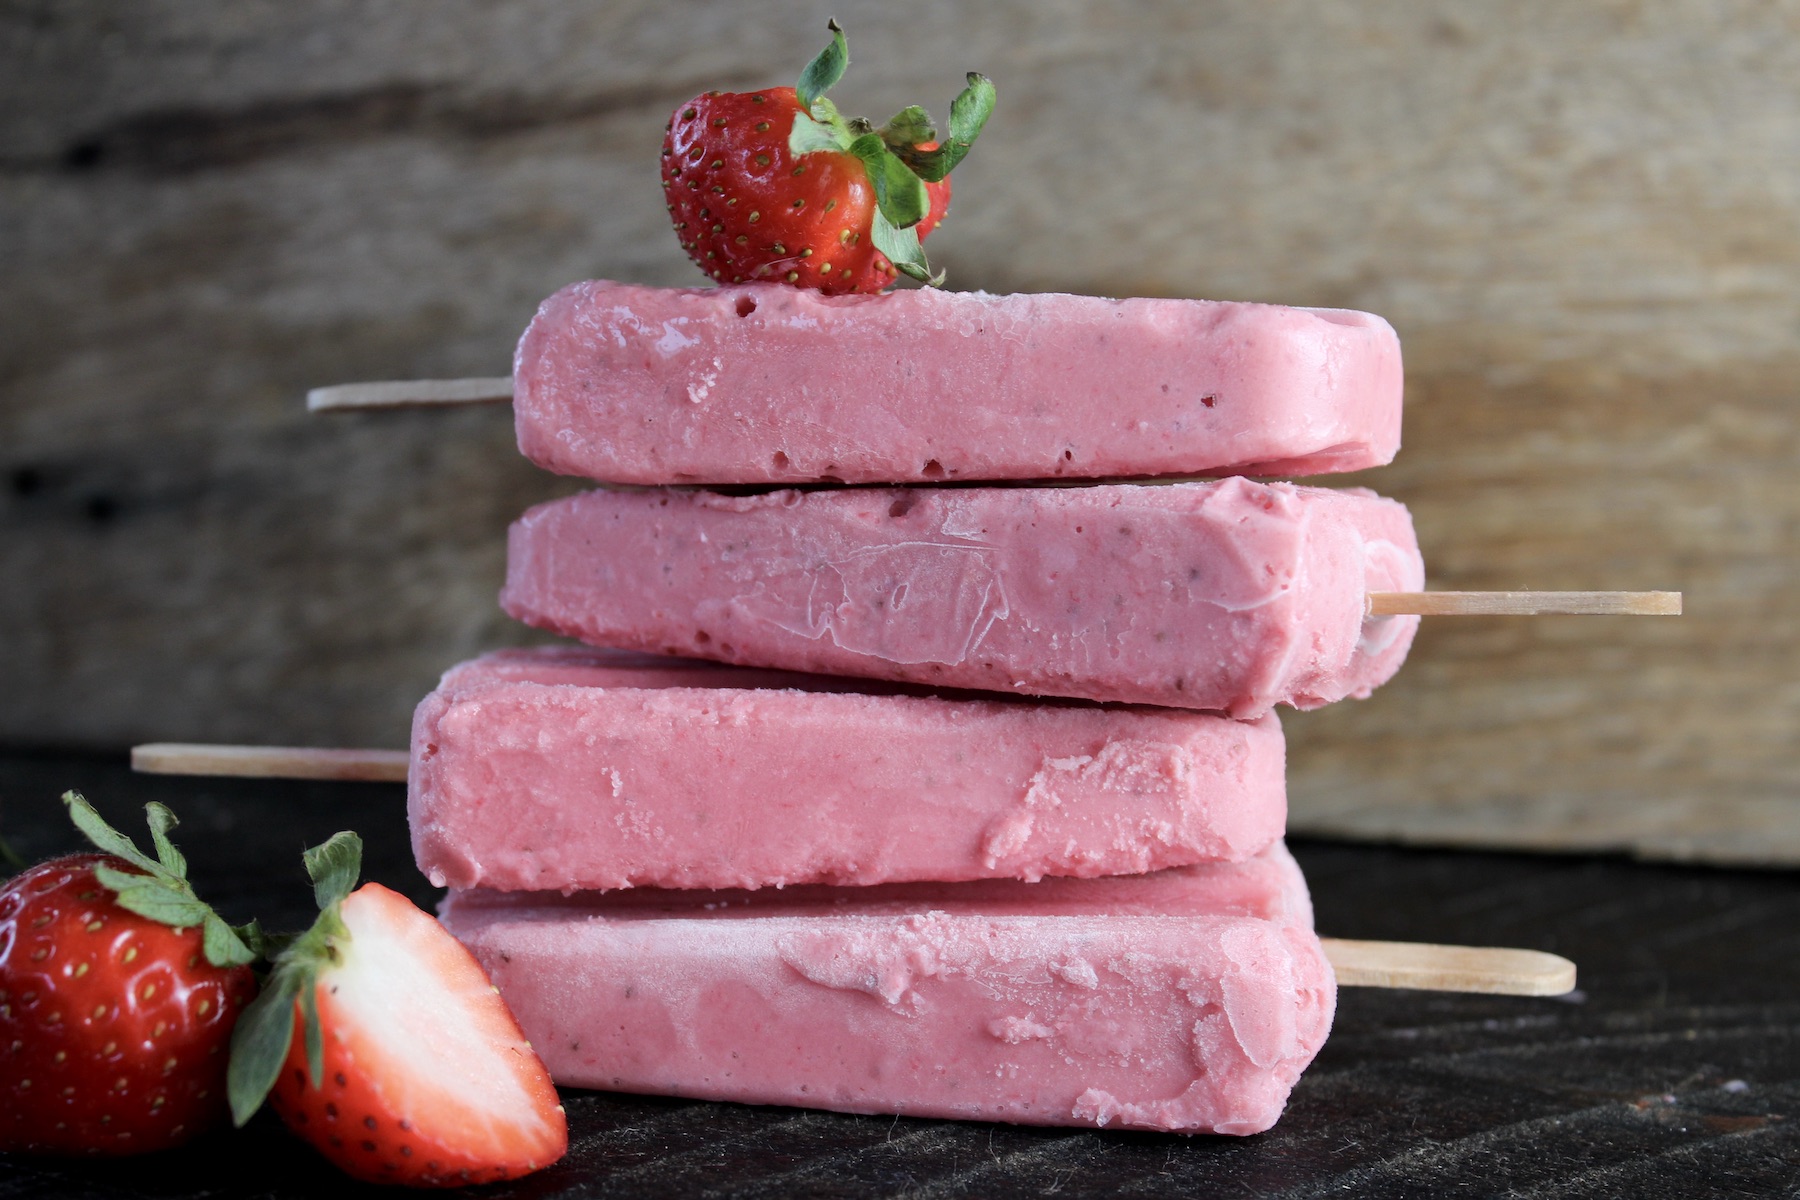 http://mydeliciousblog.com/wp-content/uploads/2020/09/Strawberry-and-Banana-Popsicle.jpg